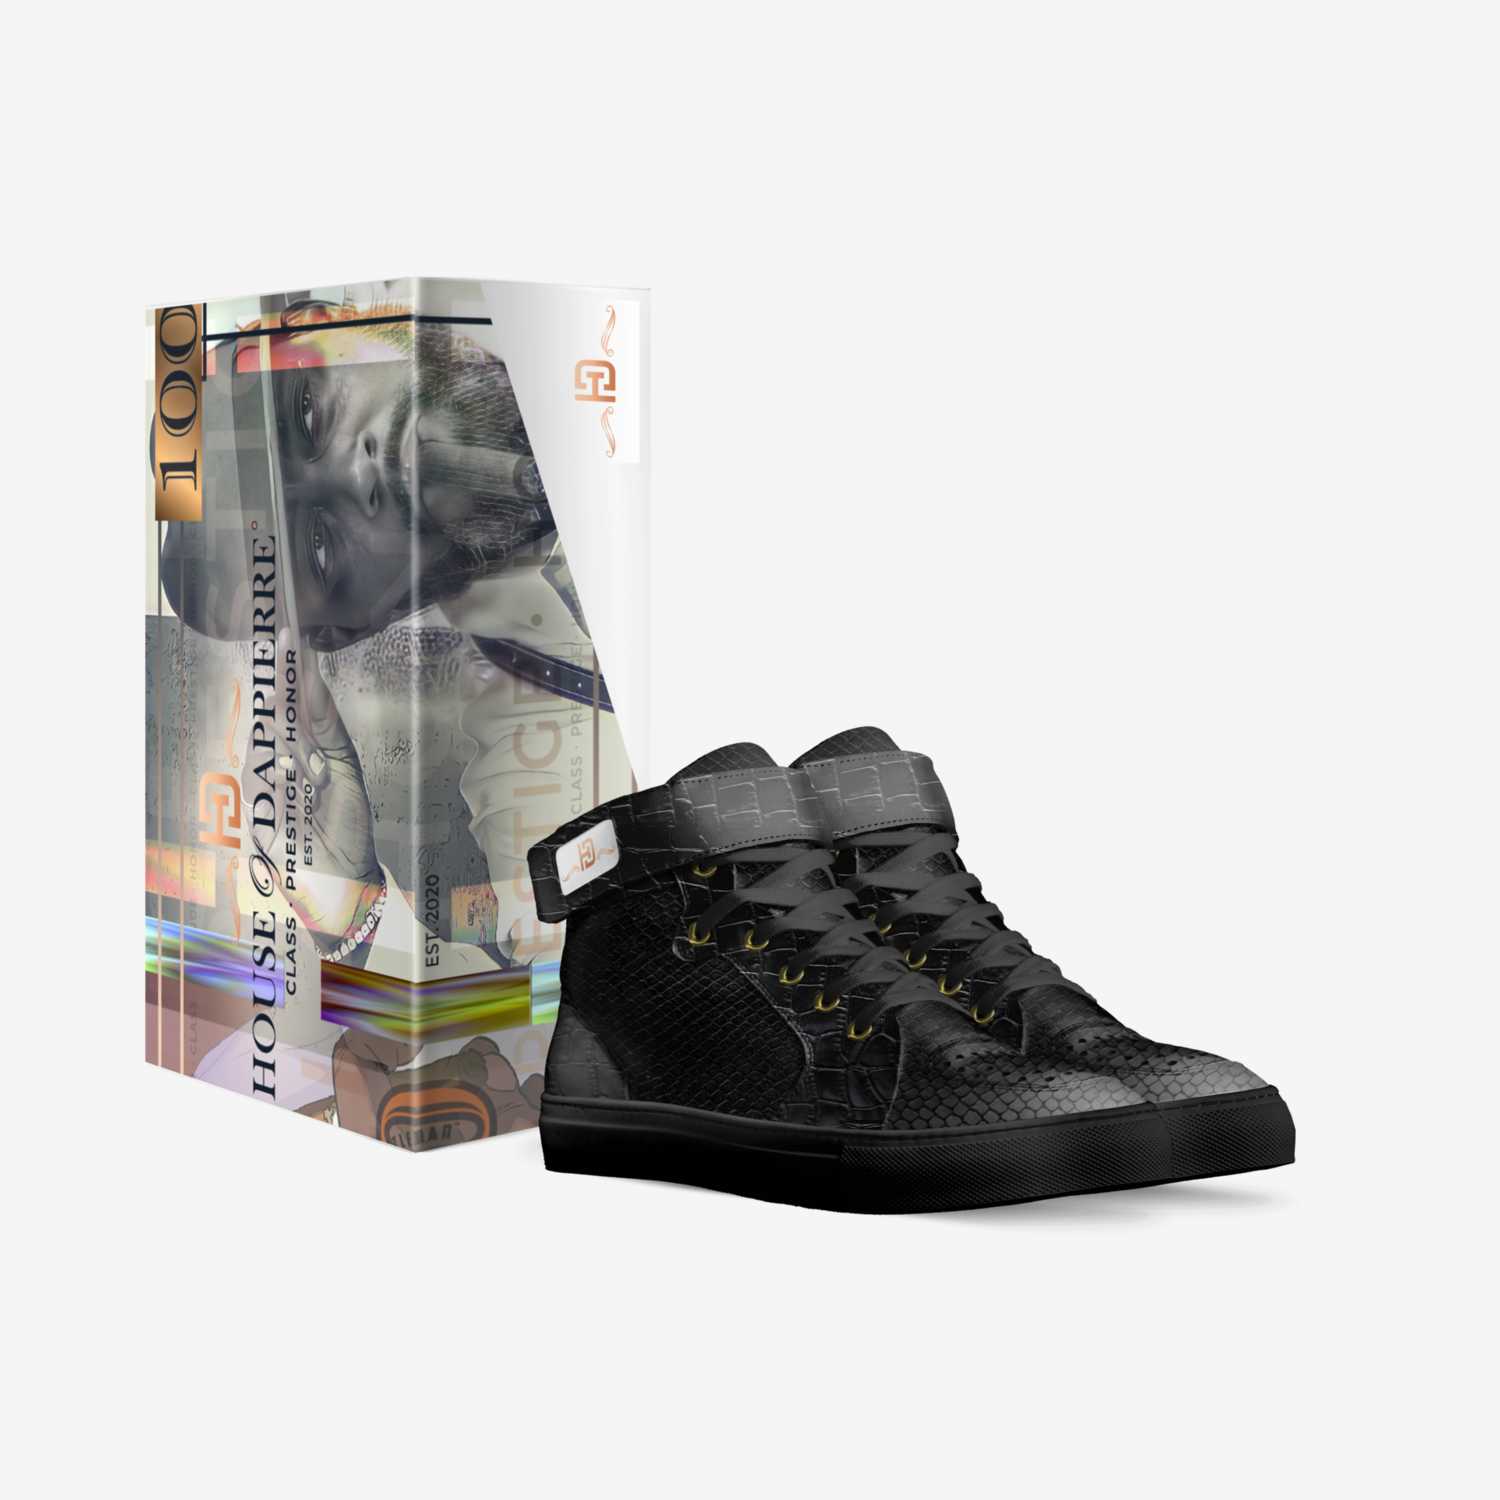 Luxury Noir by HOD custom made in Italy shoes by Jonathan Ellison | Box view